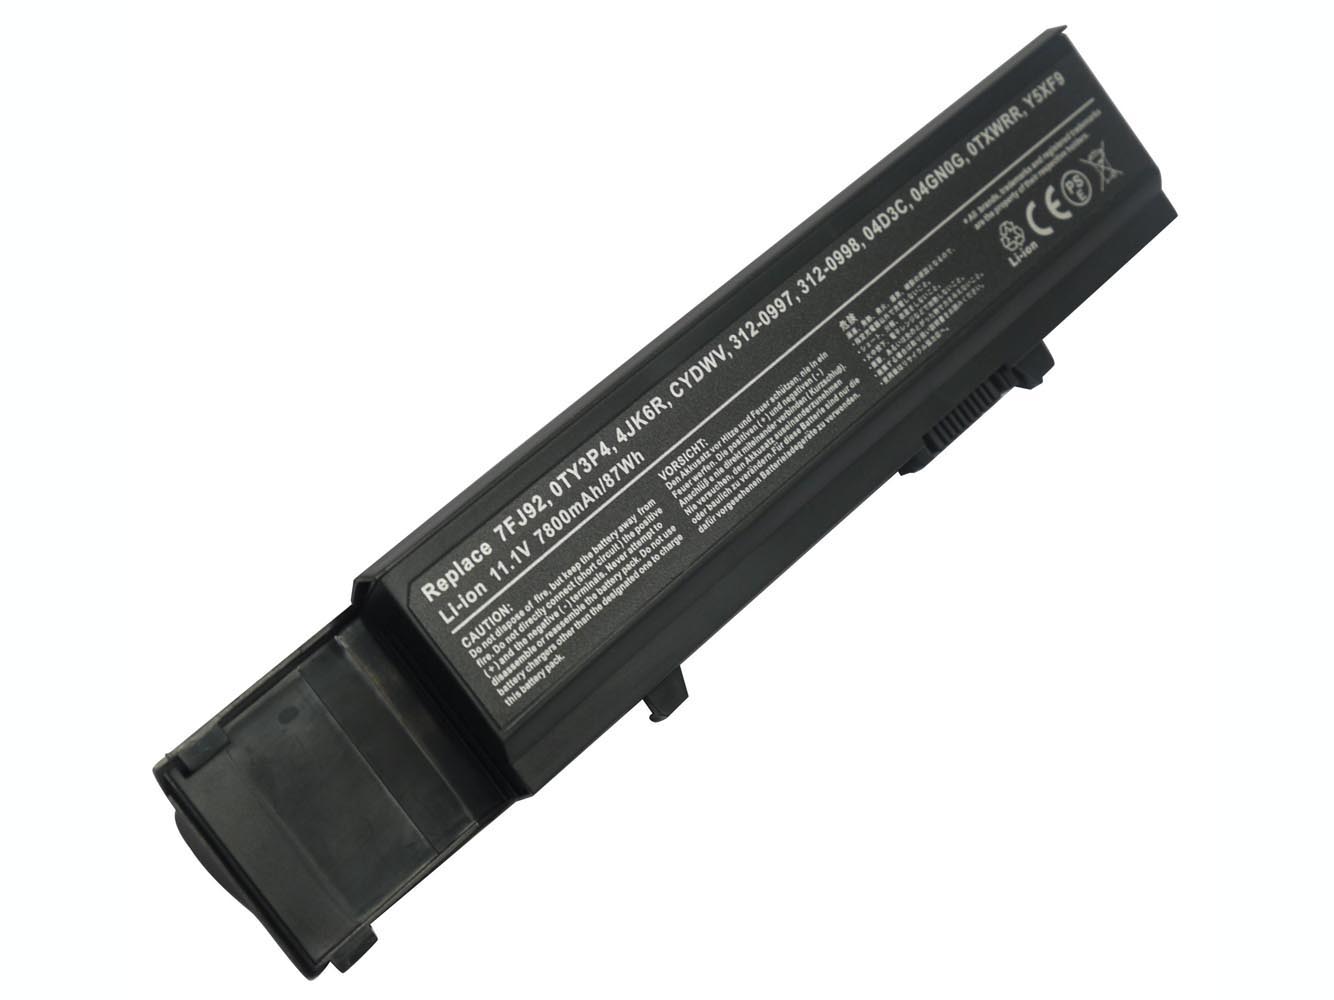 Replacement for Dell Vostro 3400, Vostro 3500, Vostro 3700 Laptop Battery